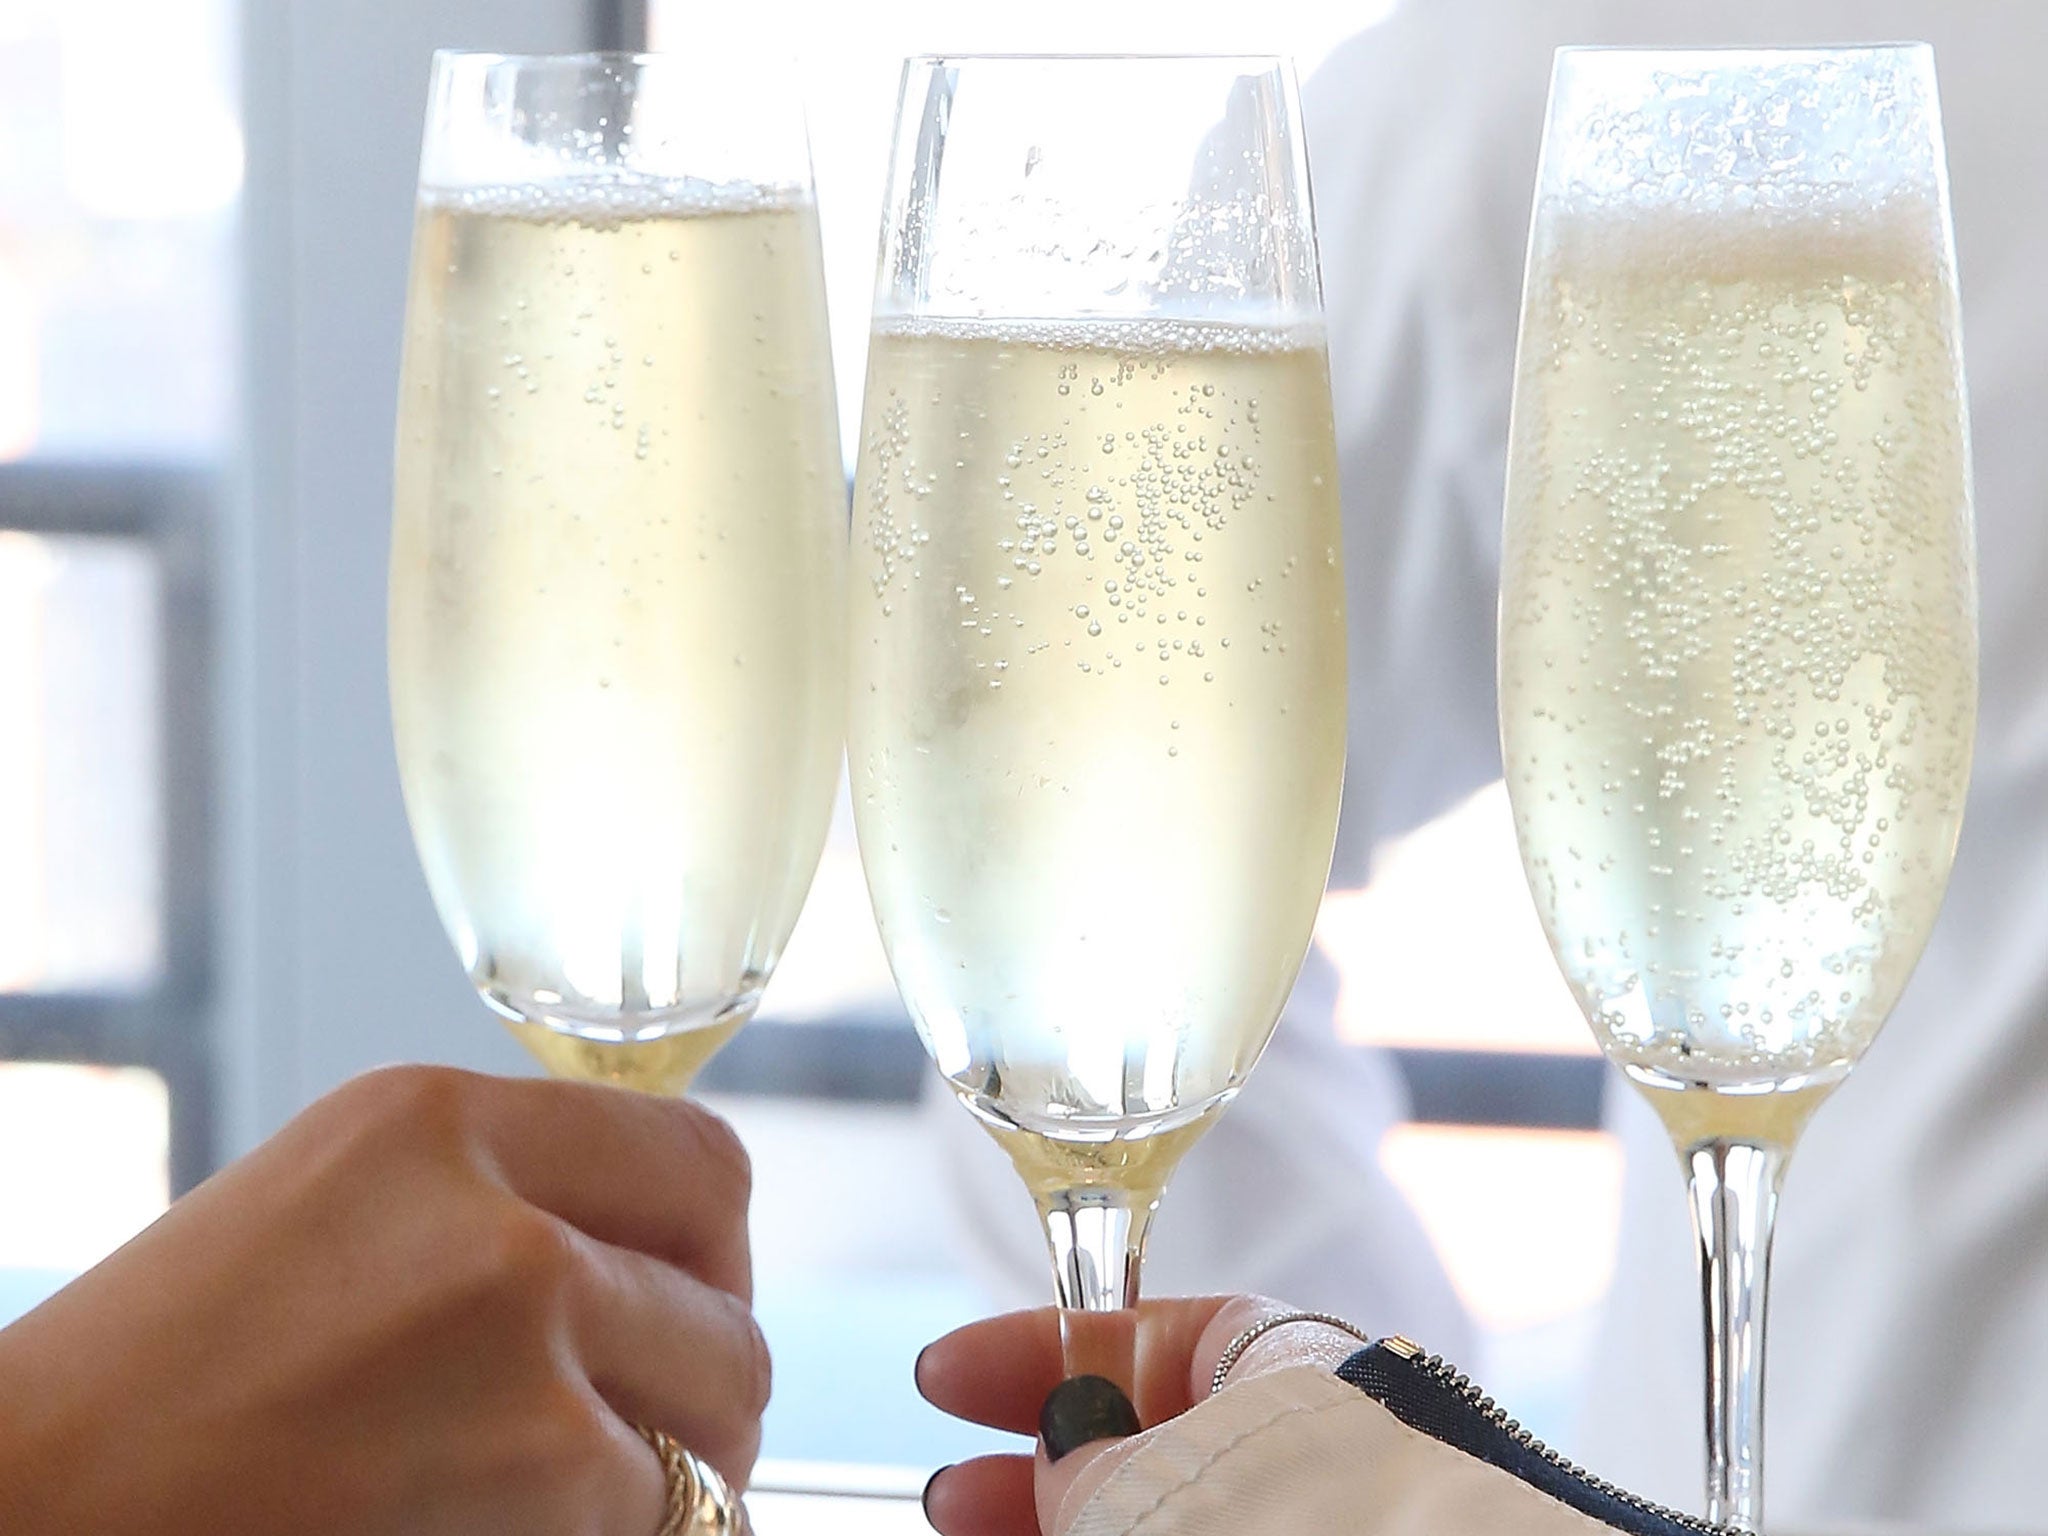 Britons spent £182m on prosecco compared to £141m on champagne